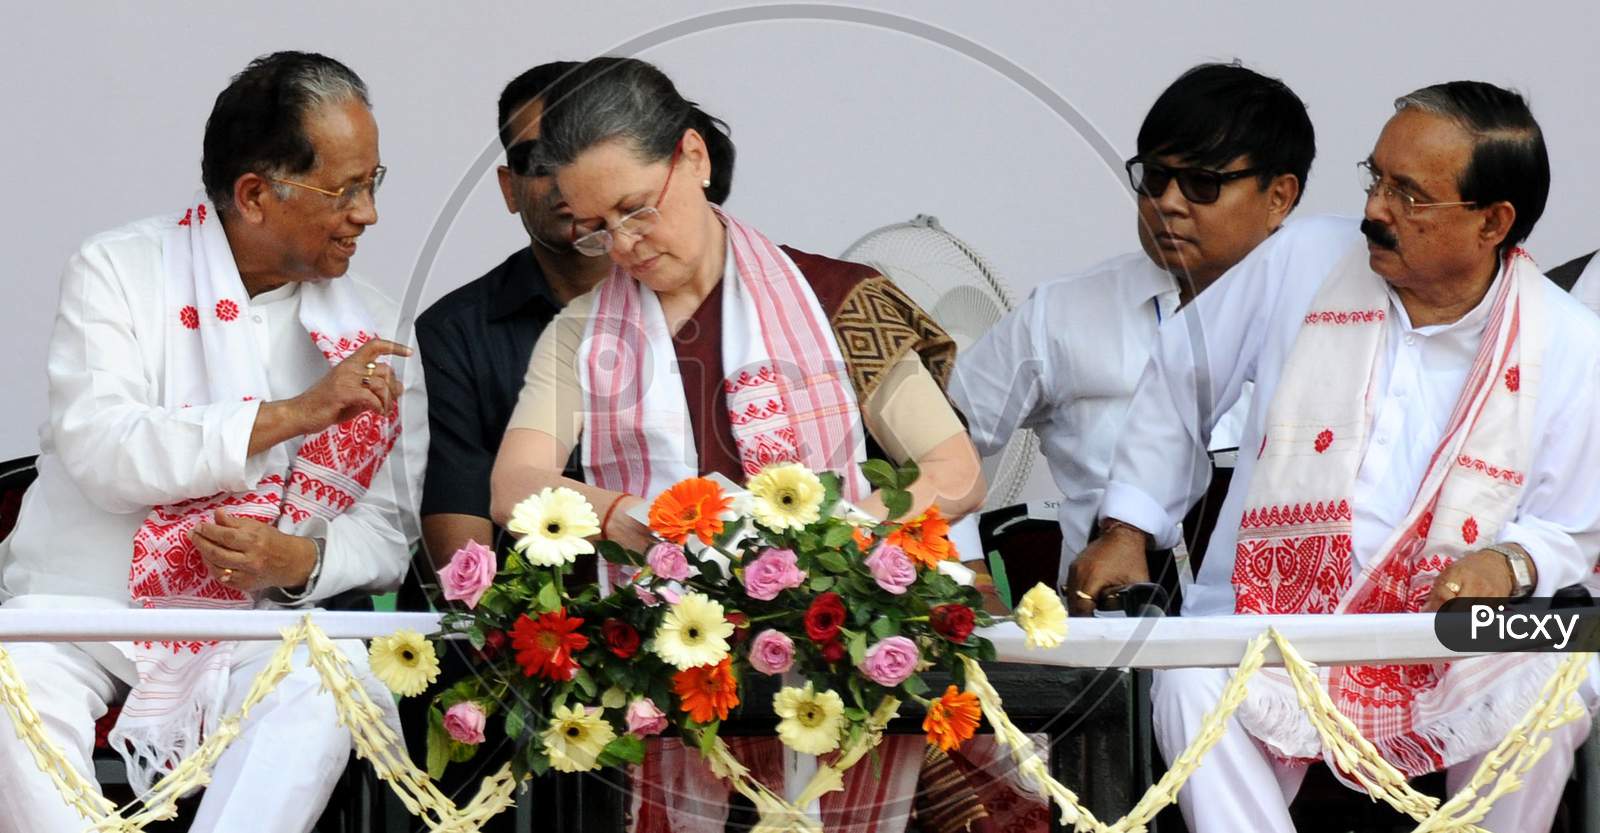 Congress President Sonia Gandhi  And Assam Chiefminister Tarun Gogoi During A Election Rally At Amguri In Sivsagar District Of Assam On 30-3-16.